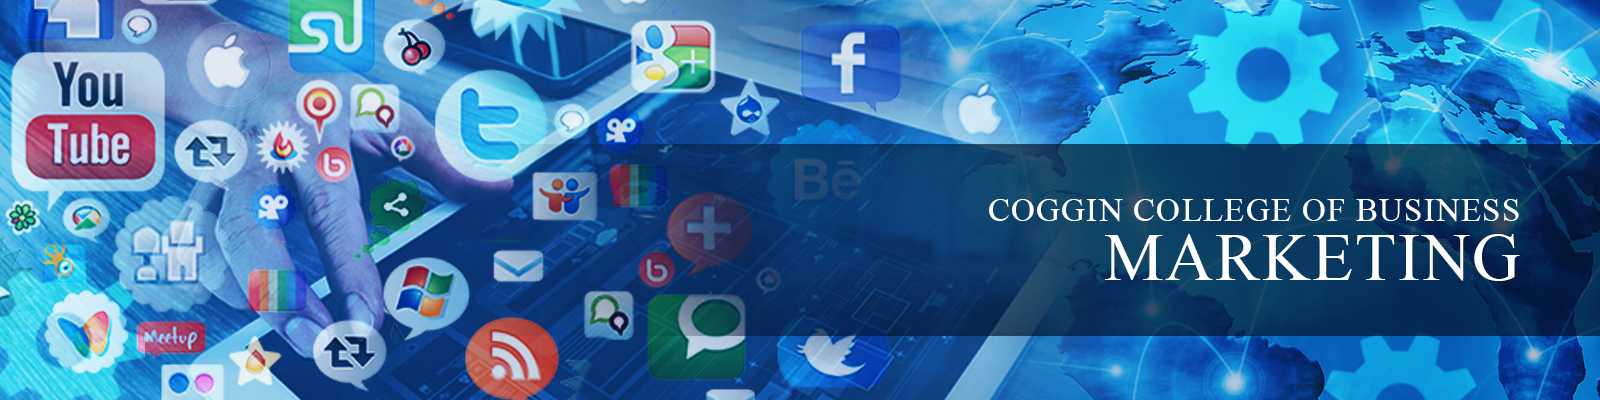 Blue Coggin College of Business Marketing banner with multiple social media icons